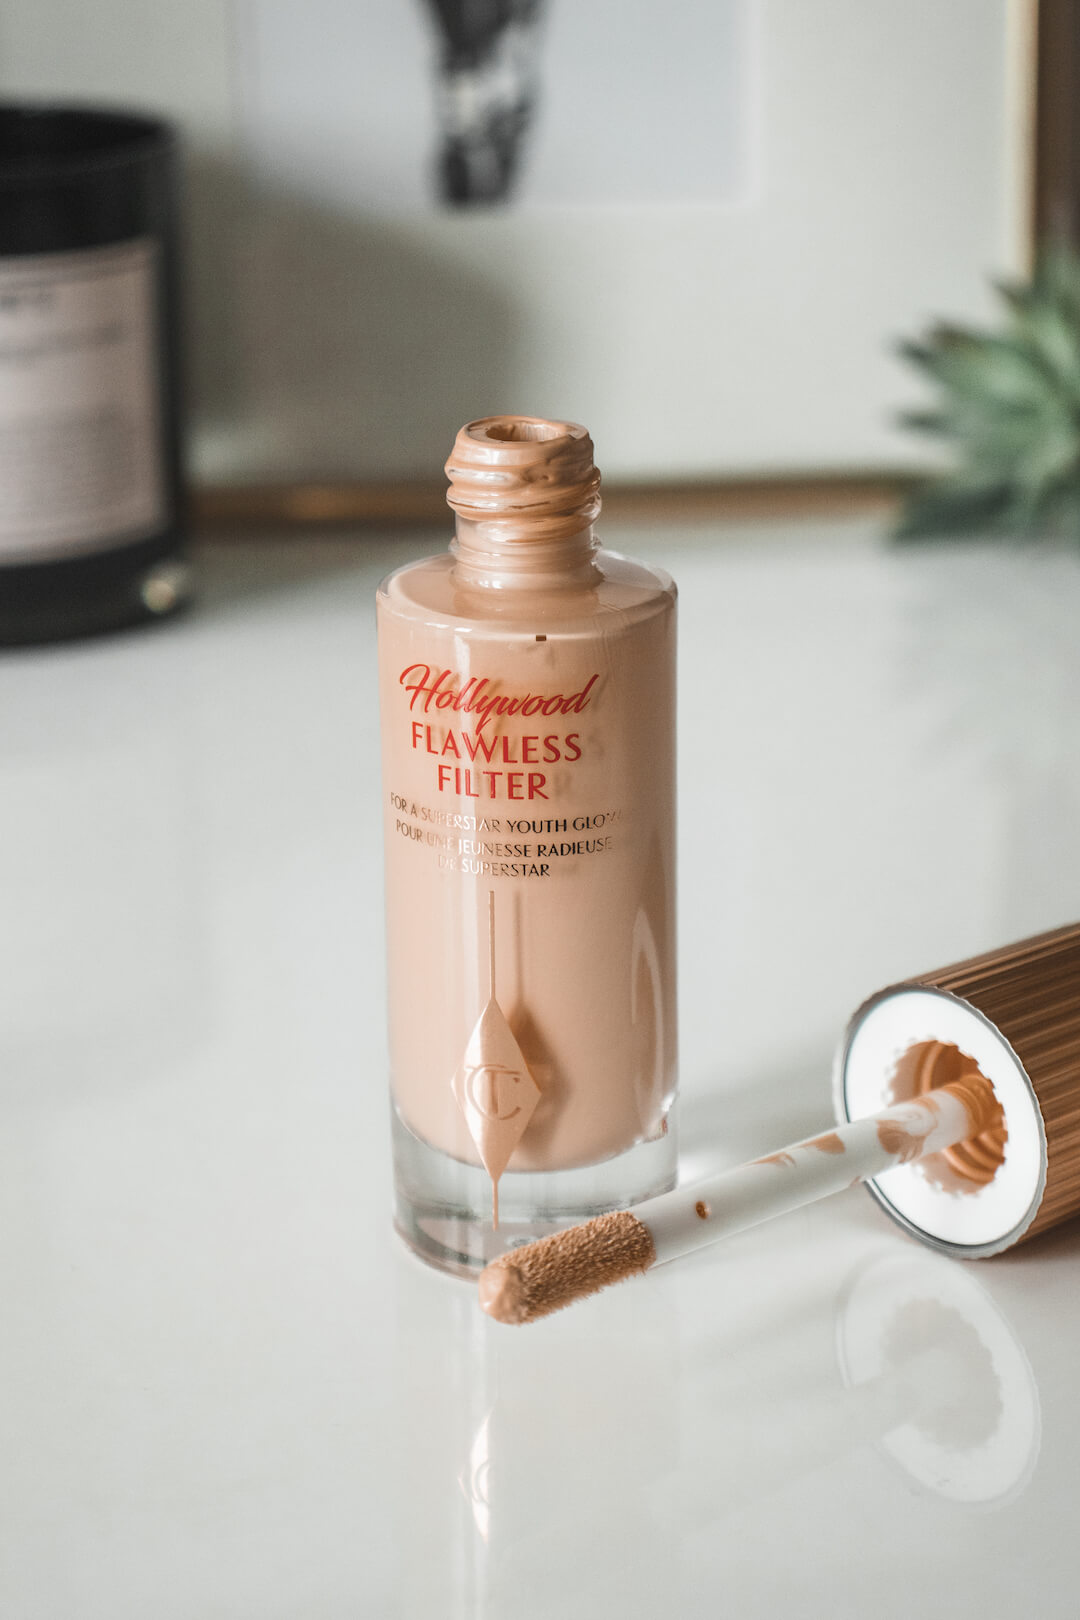 The Charlotte Tilbury Hollywood Flawless Filter Is the Prettiest Highlighter... Ever?